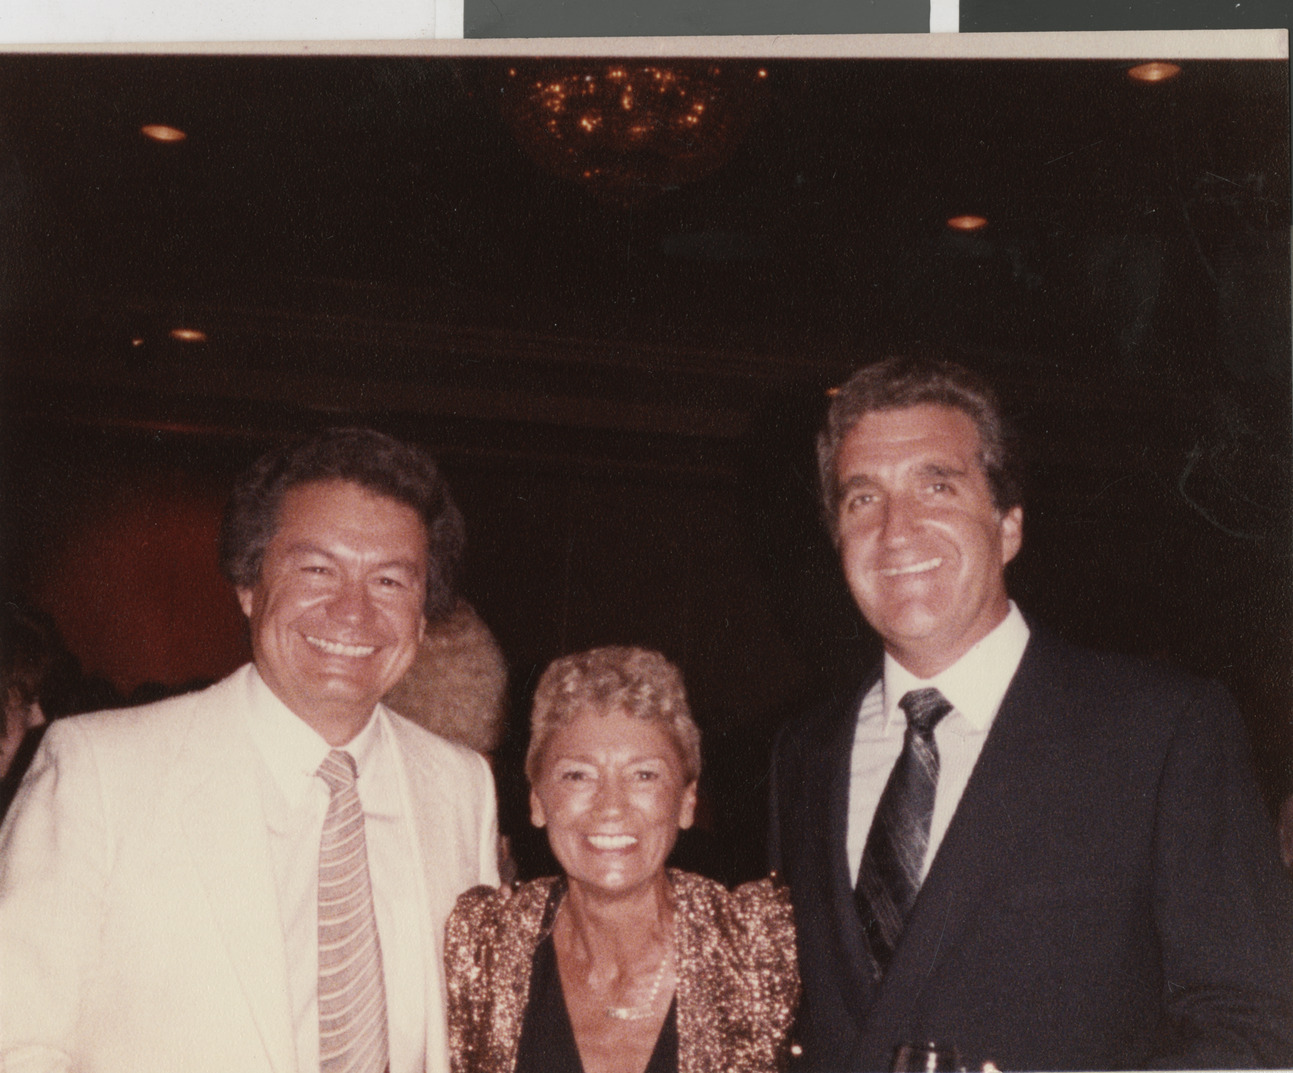 Photograph of Ron Lurie with unidentified couple, circa 1978